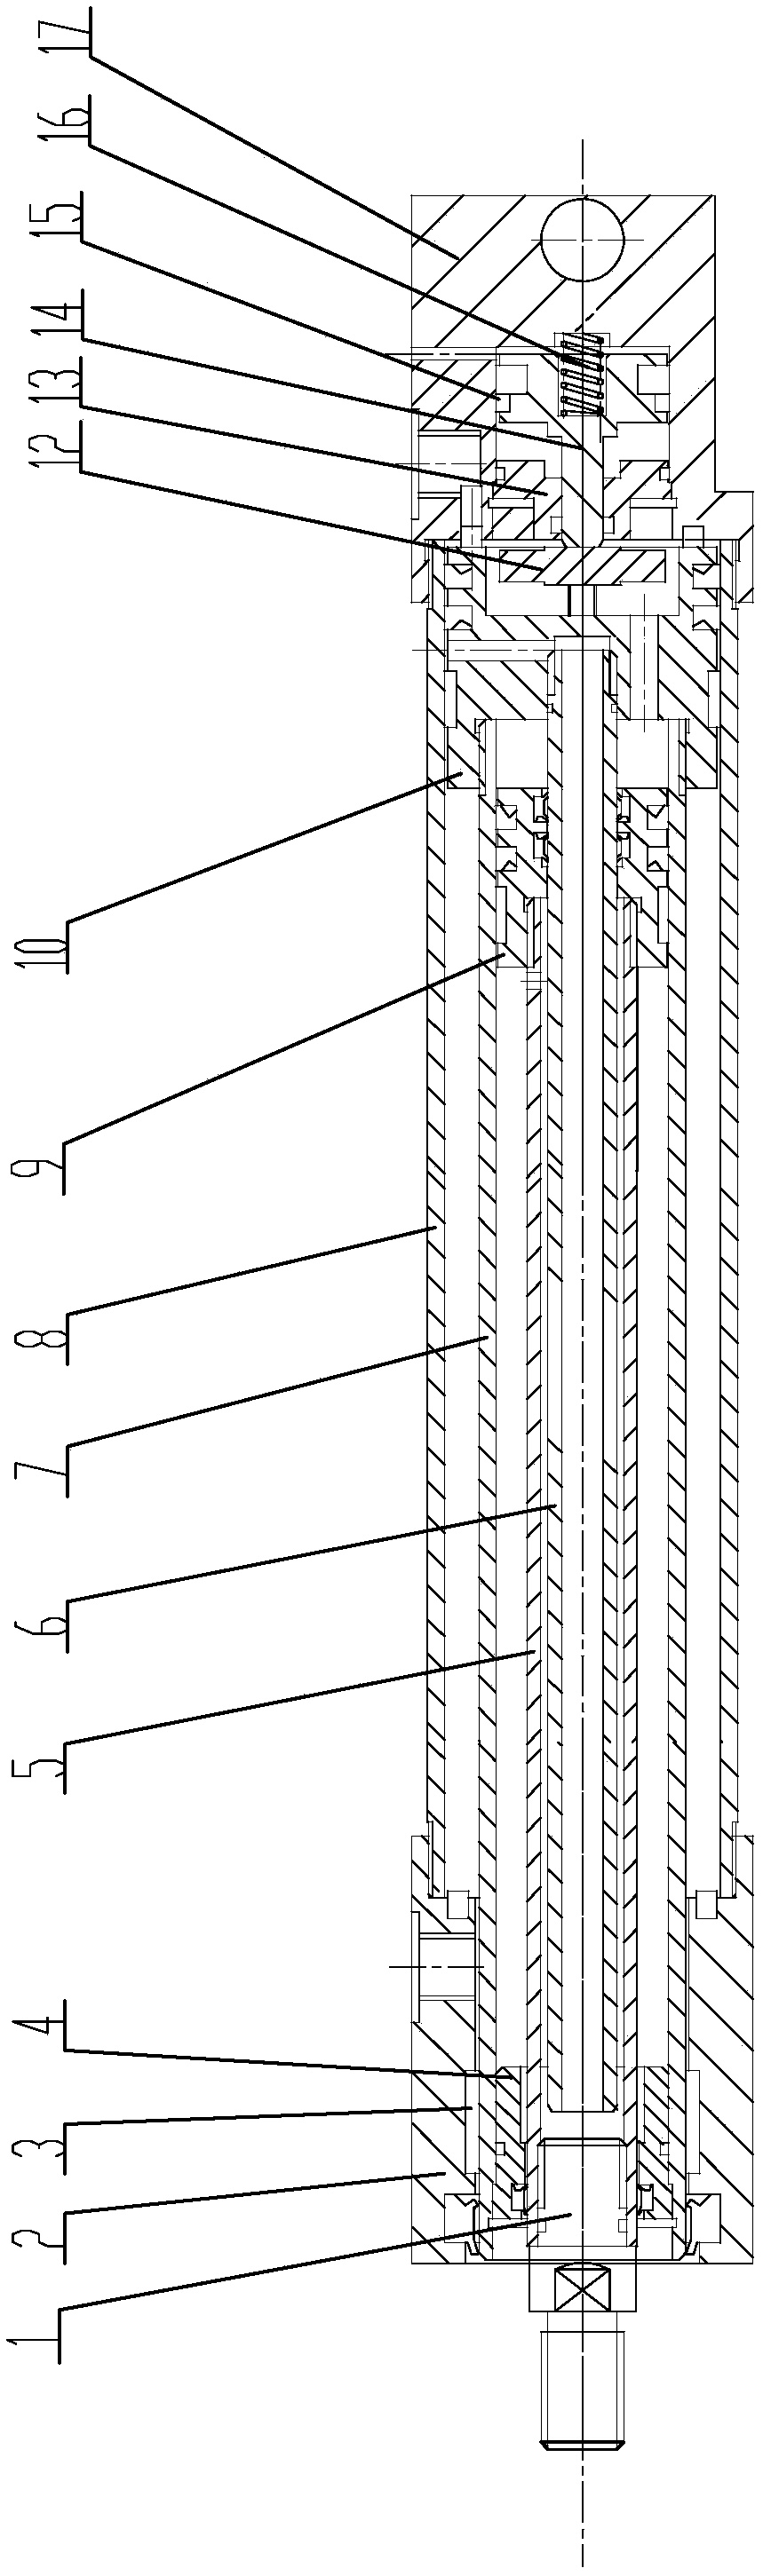 Bidirectional on-load multi-stage air cylinder capable of being mounted horizontally